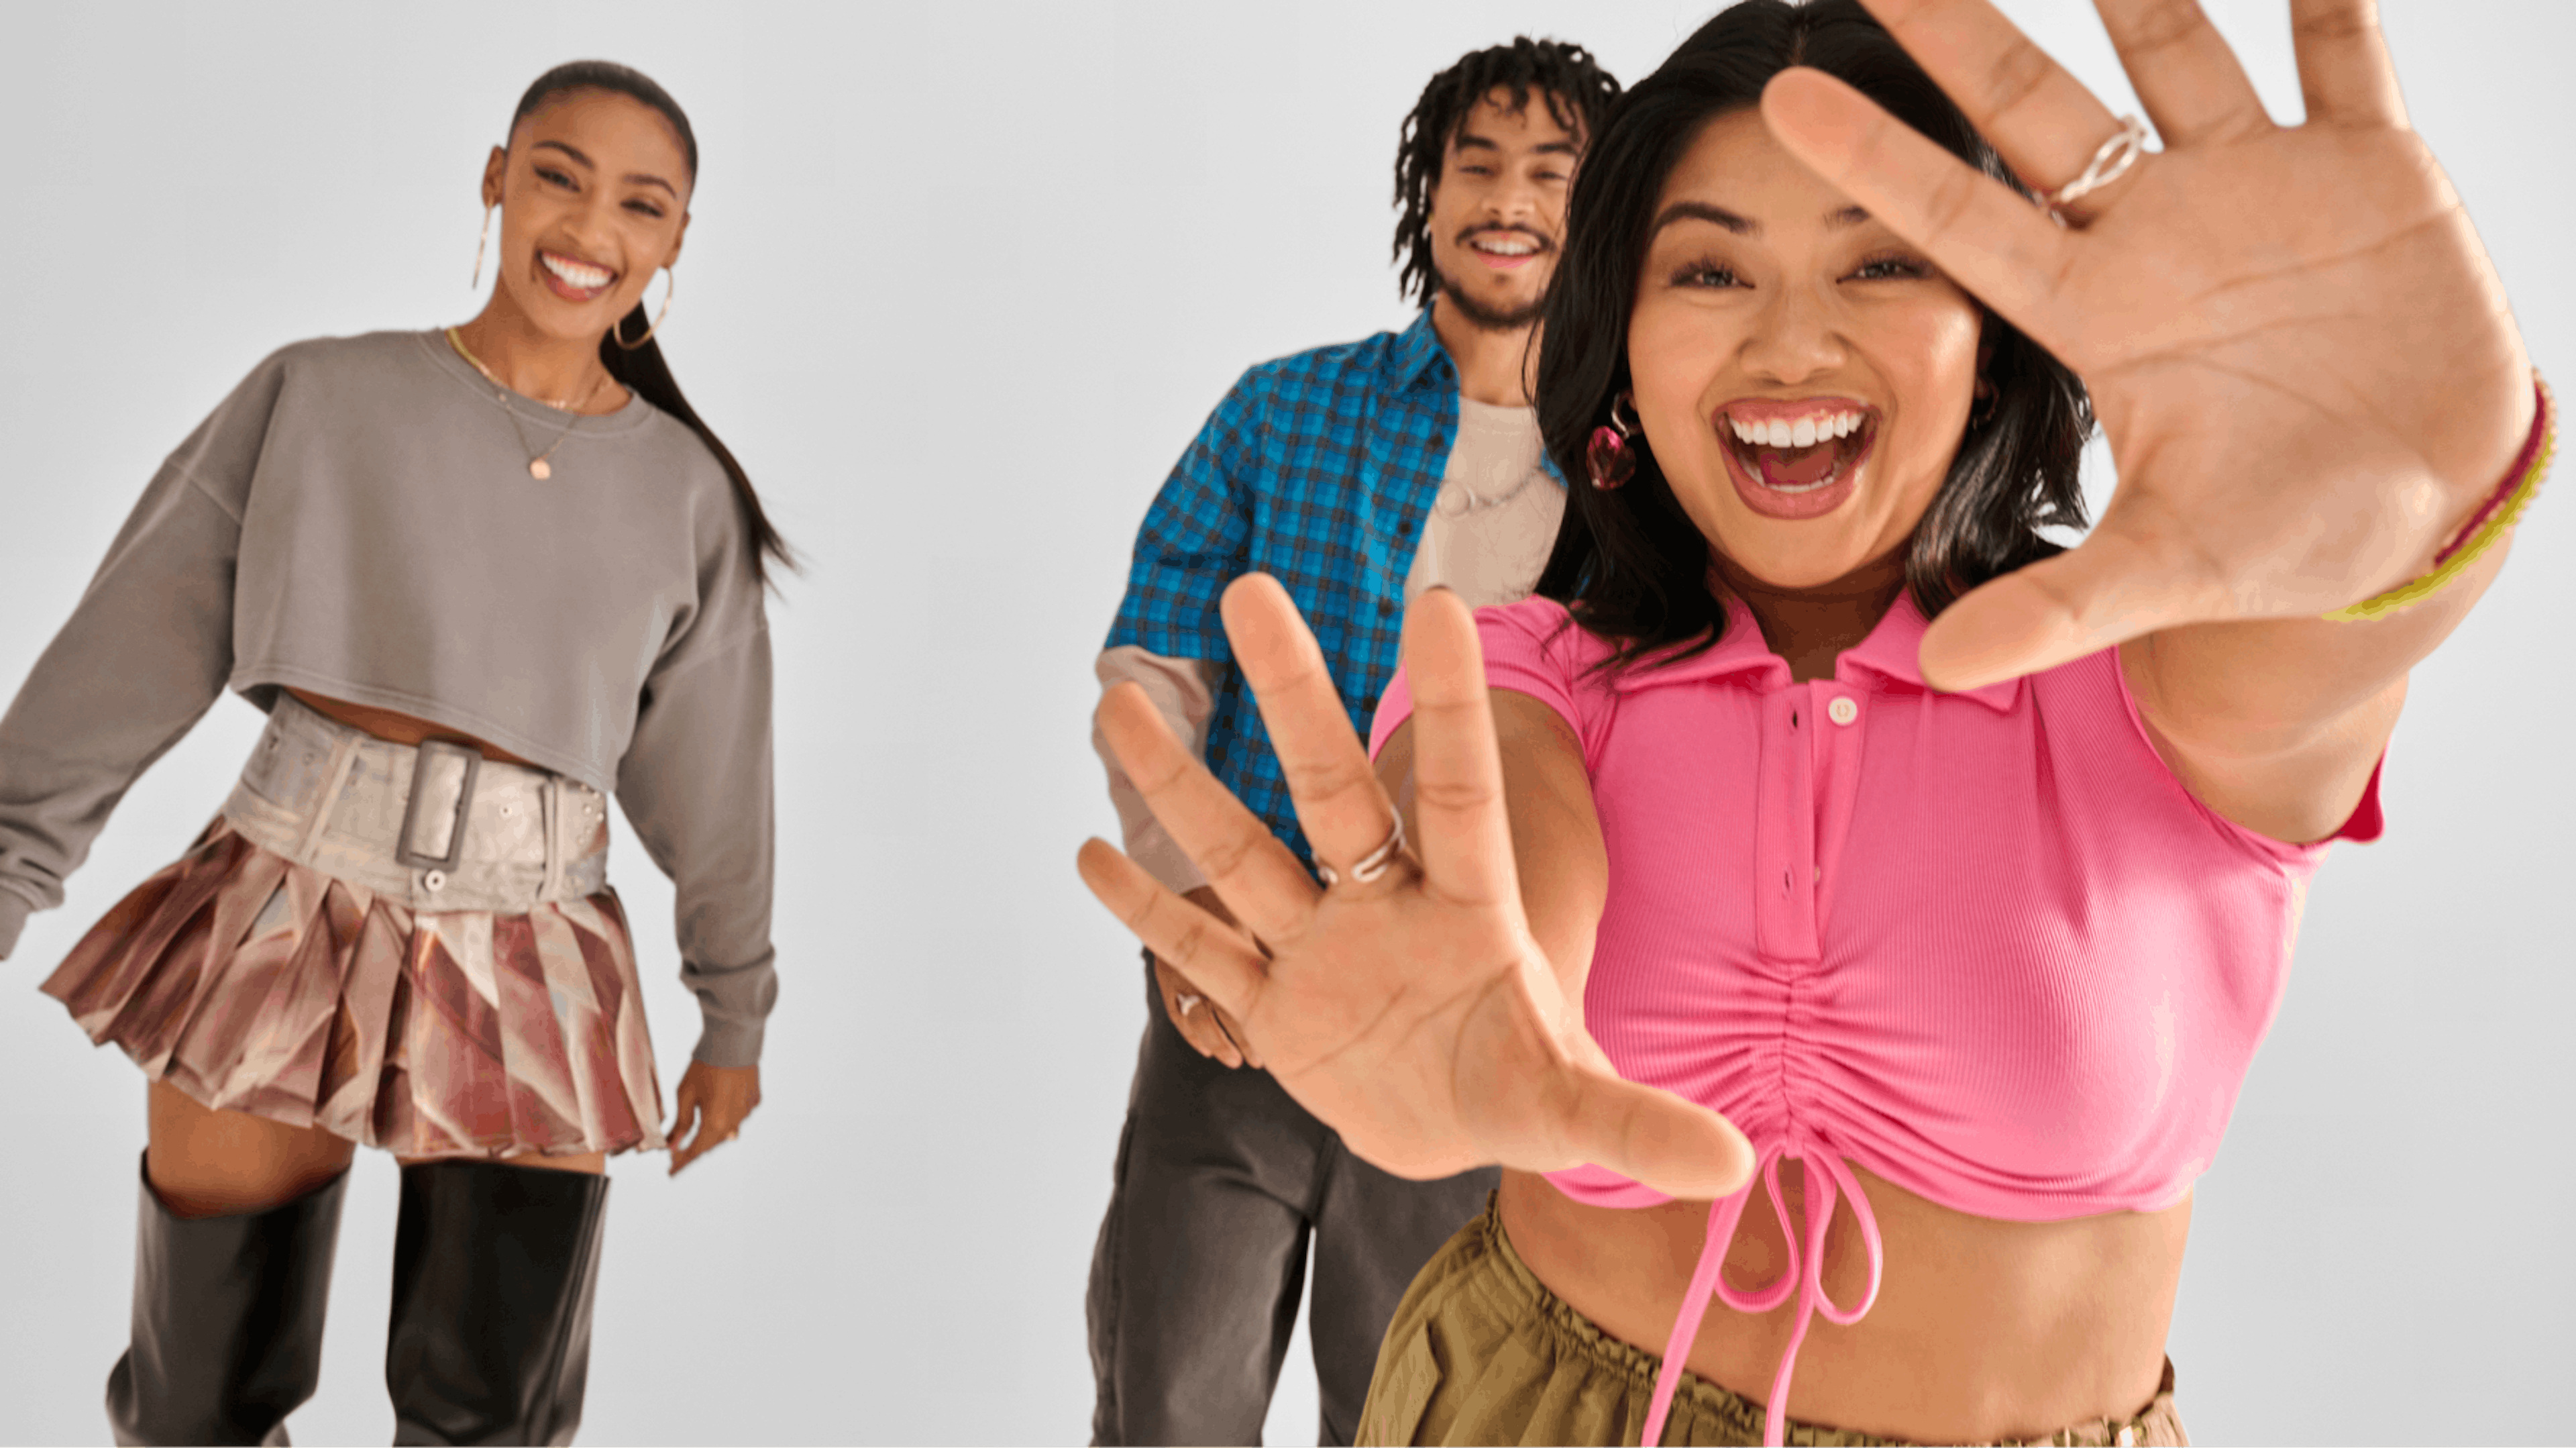 The image shows three young adults posing in a white seamless studio, wearing preloved clothing. Asian girl is showing her hands in a playful way.